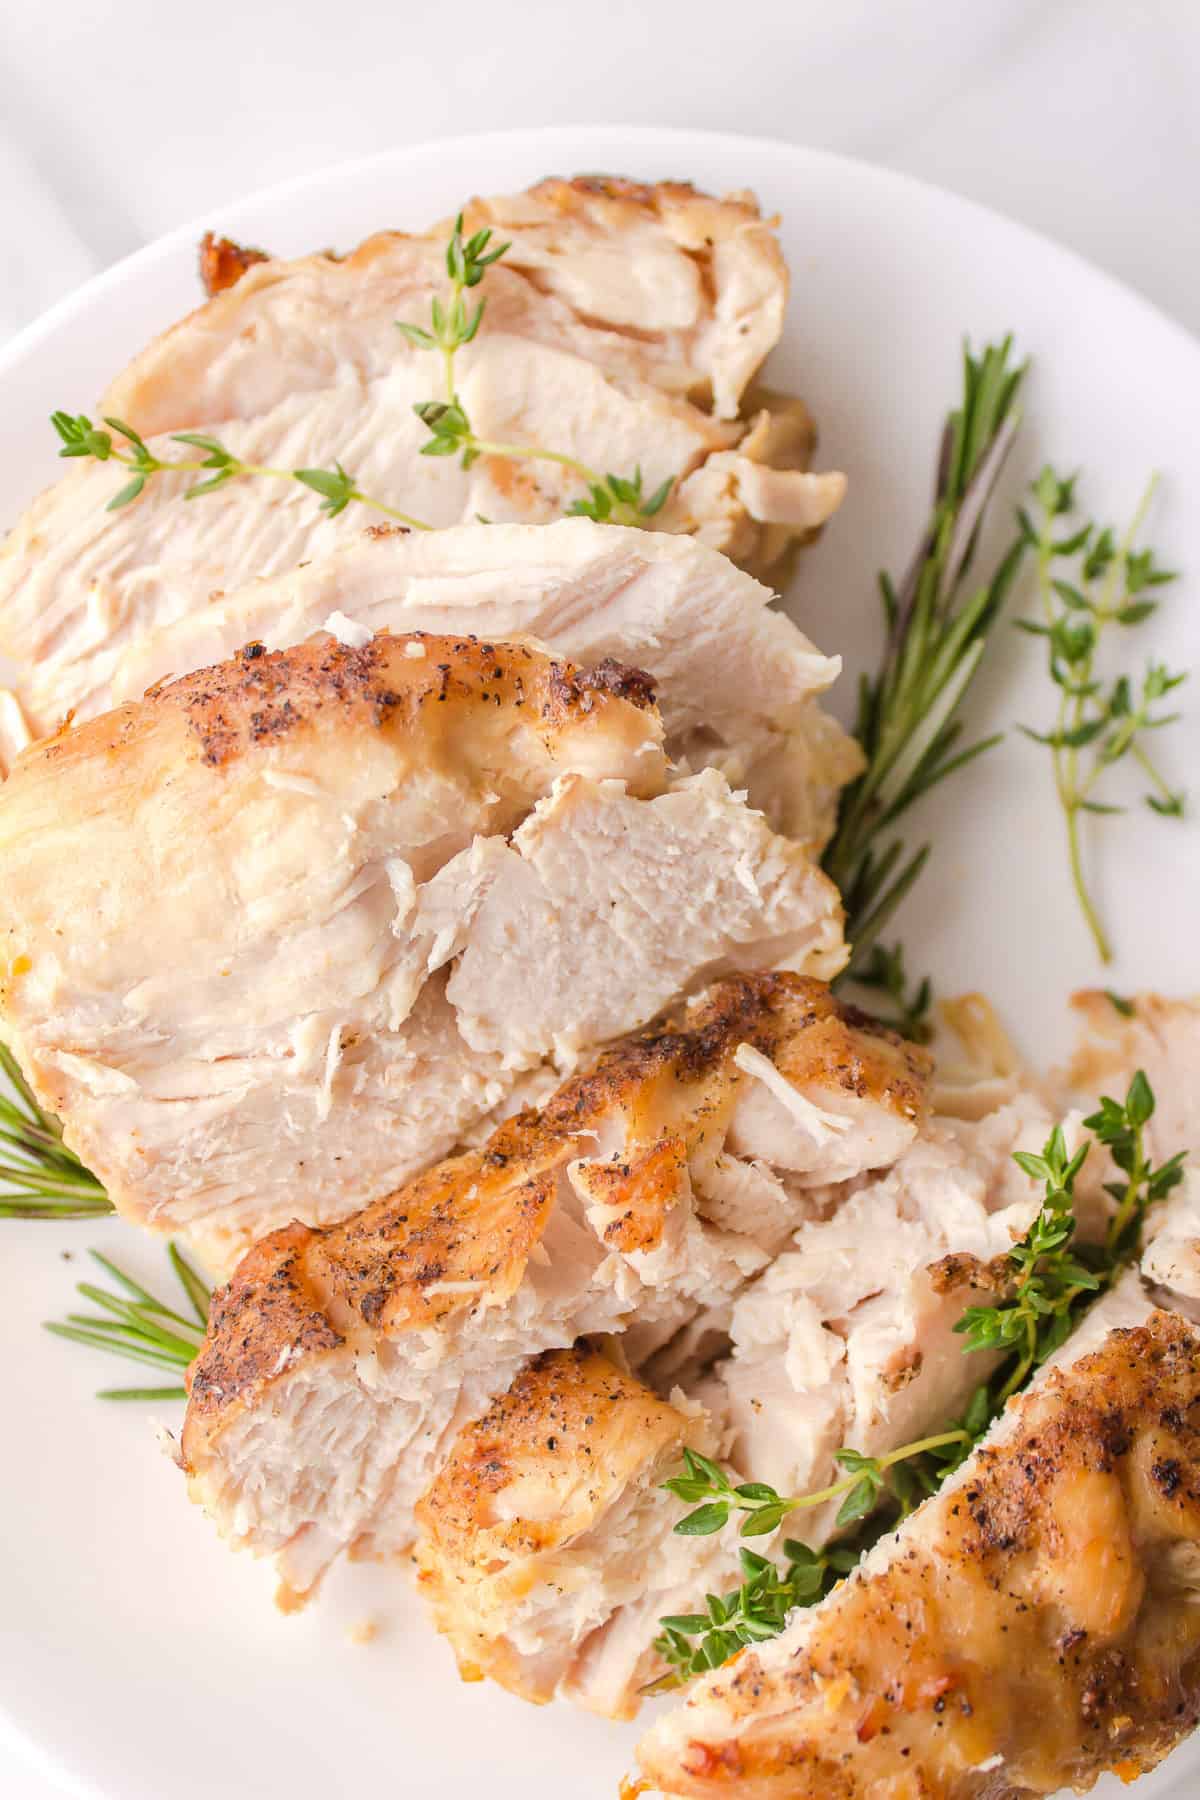 slice crockpot turkey breast served on a white plate with homemade gravy and rosemary